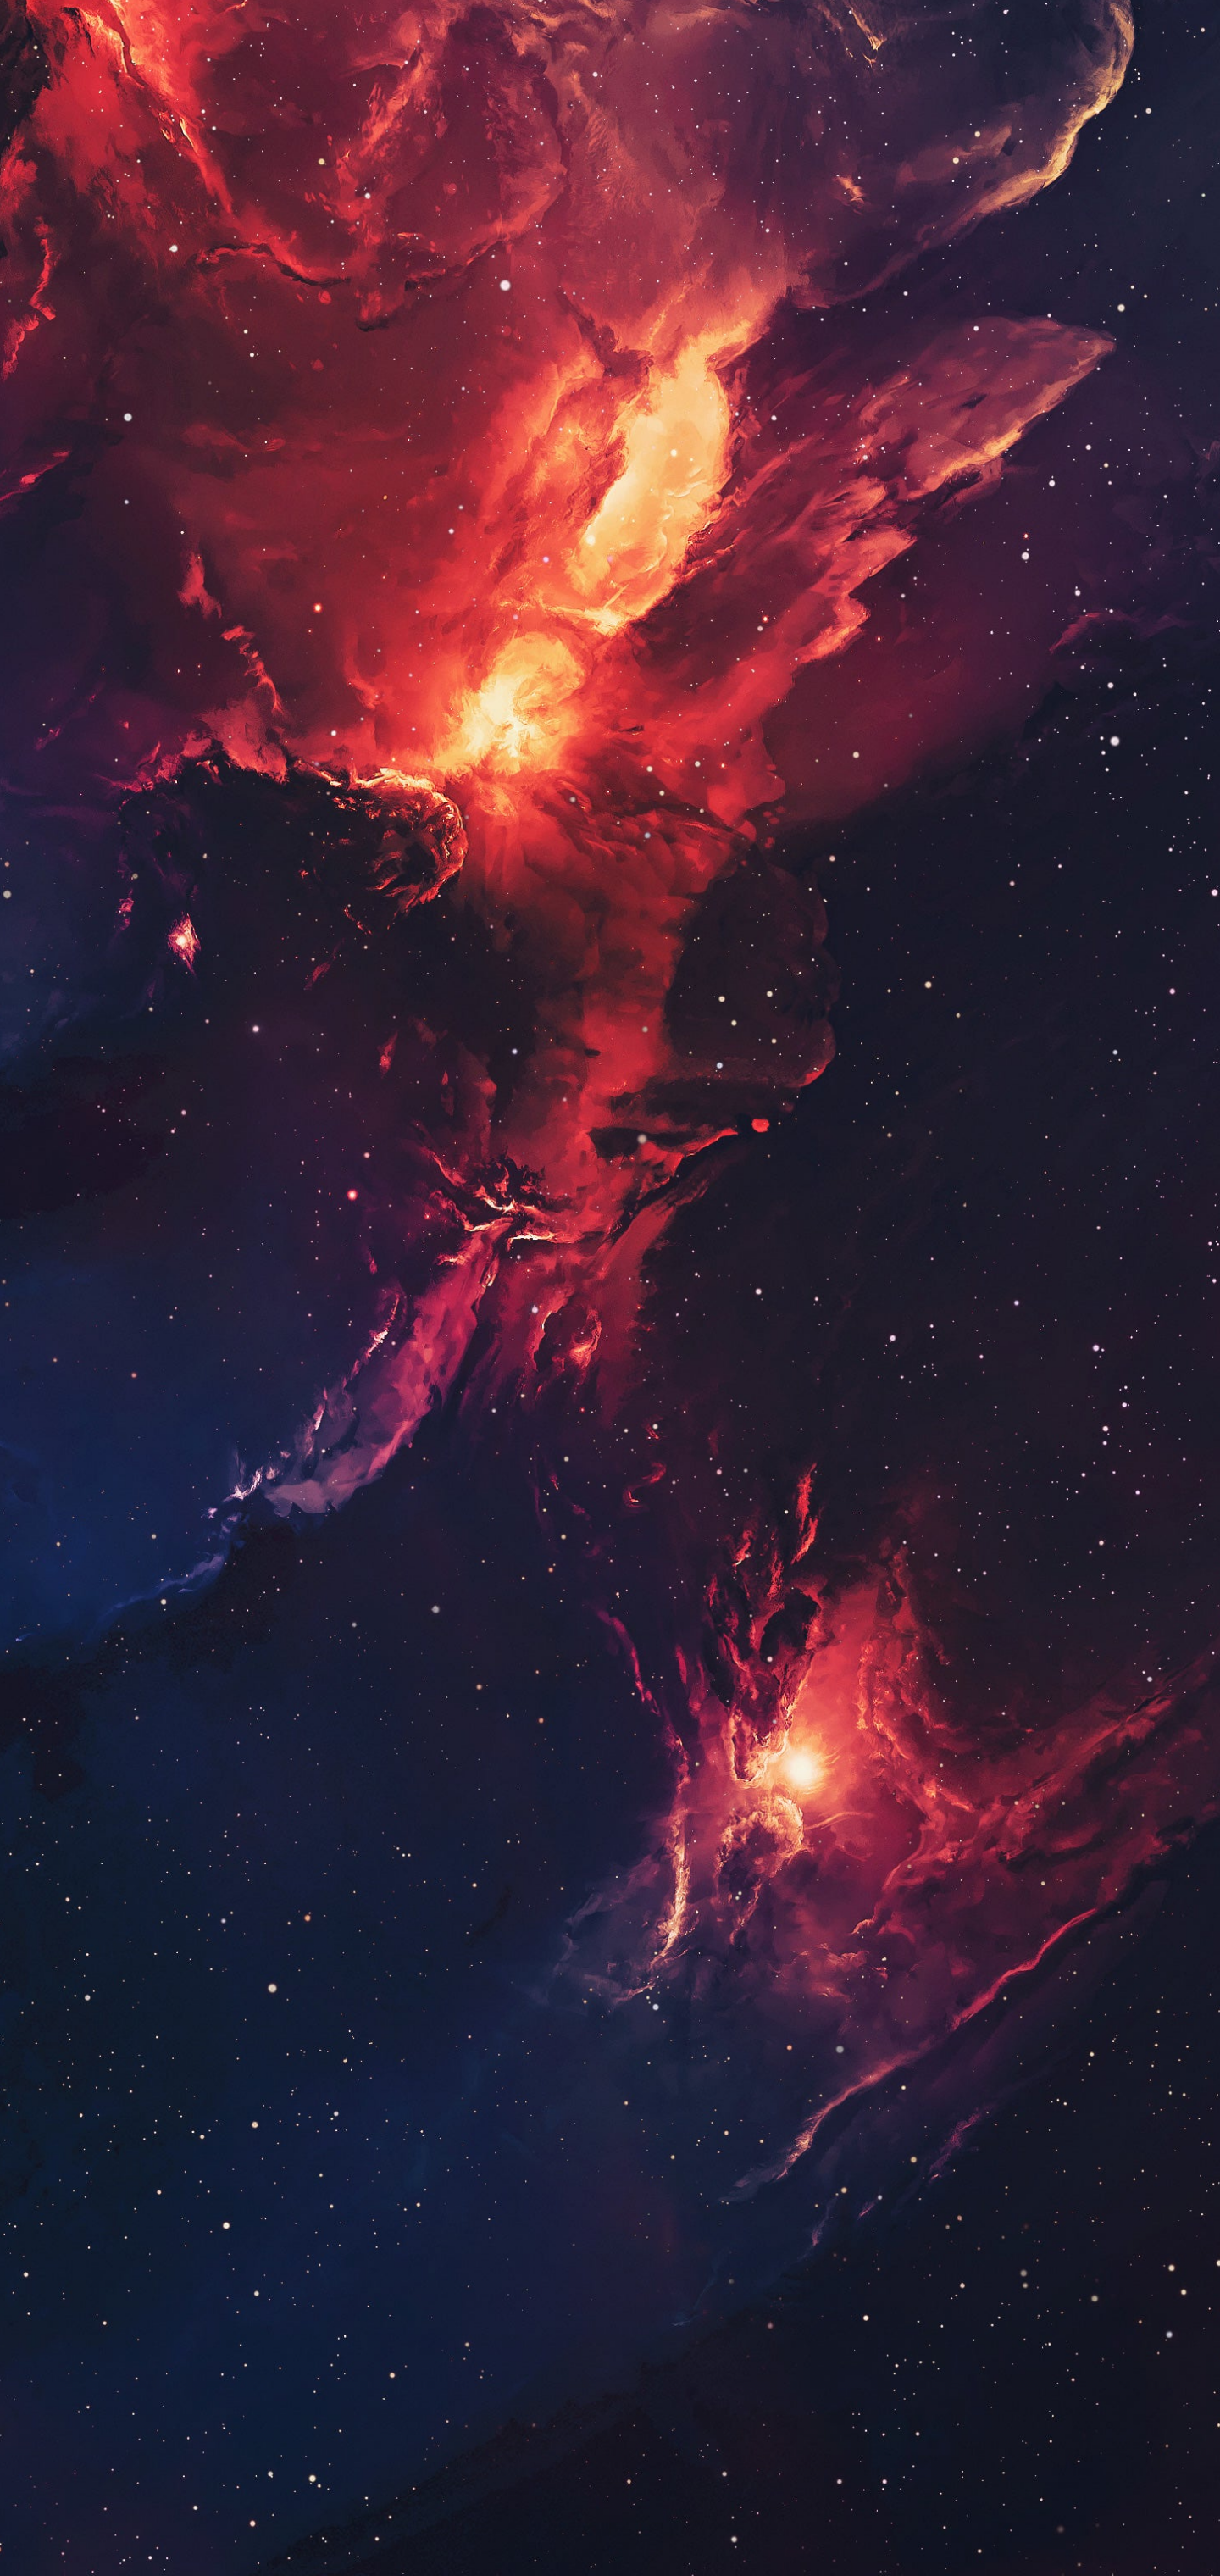 Best Wallpaper for iPhone 11 Pro Max (YTECHB.com). Space phone wallpaper, Wallpaper space, Trippy wallpaper